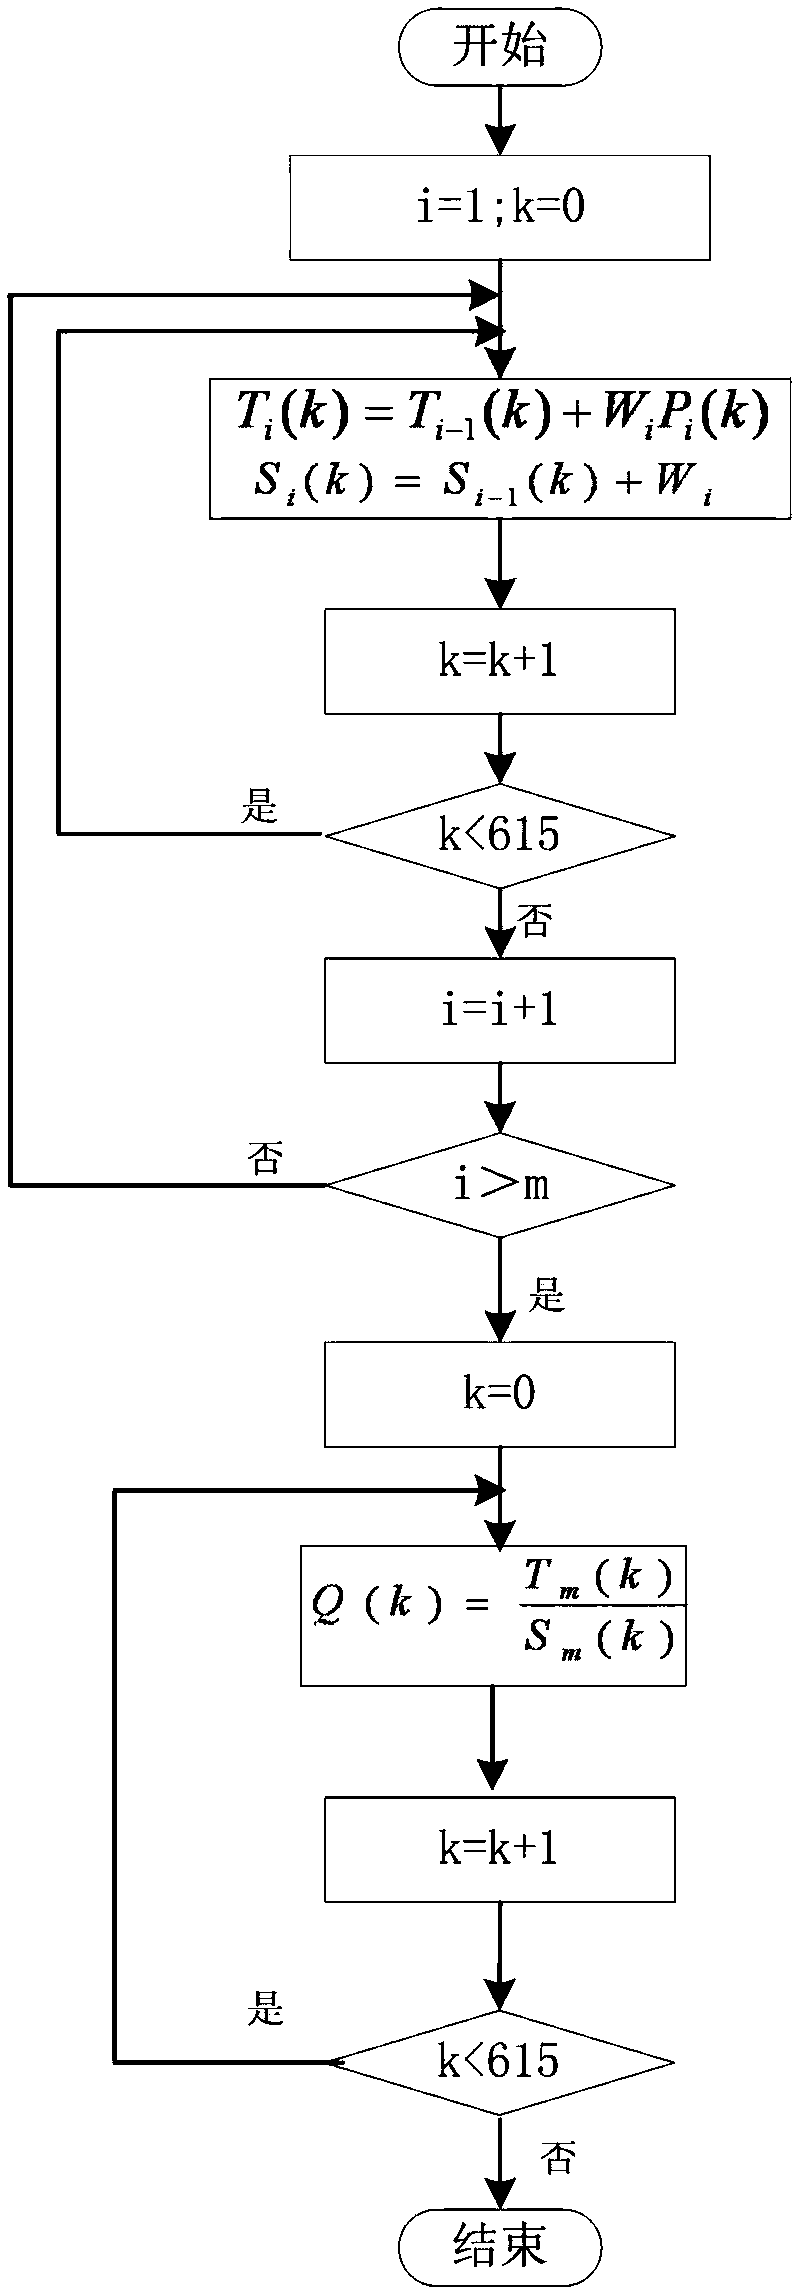 A realization method of spectrum analysis real-time waterfall diagram